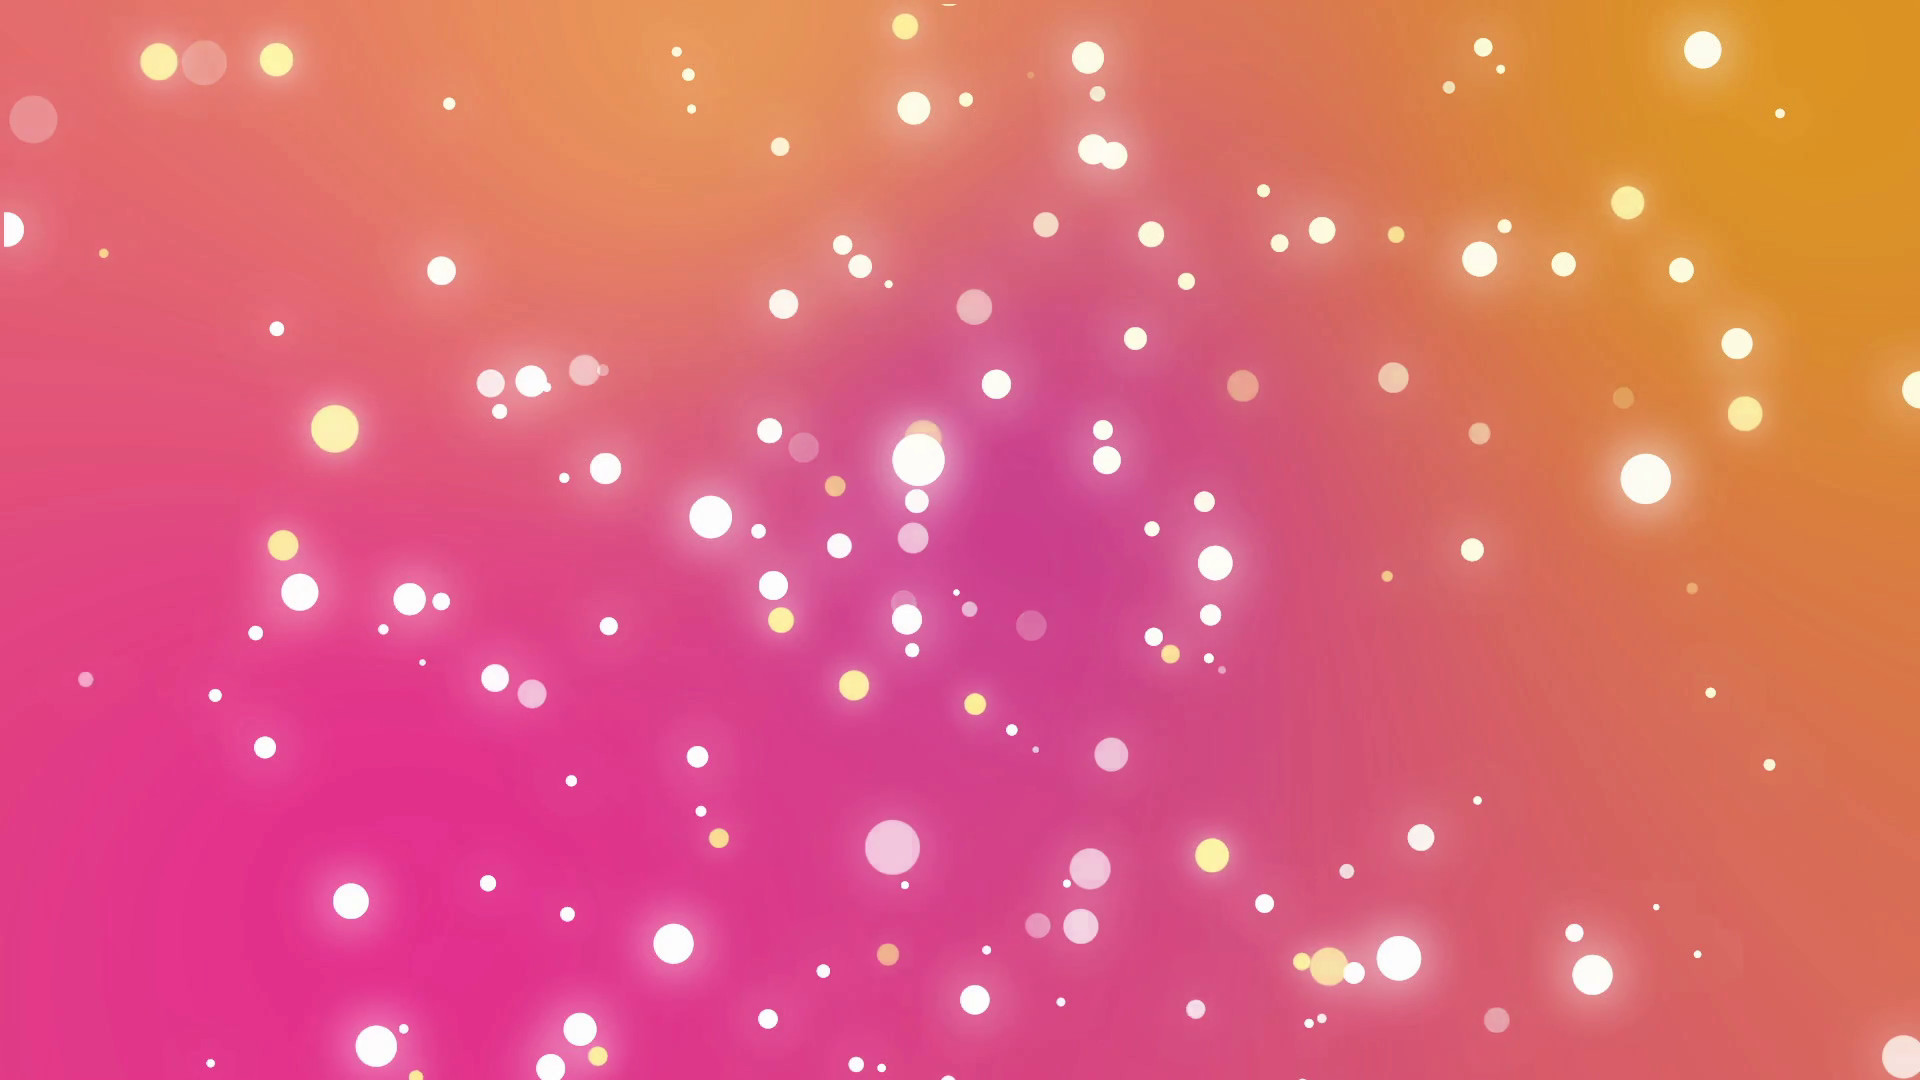 Pink and Orange Backgrounds (45+ pictures)